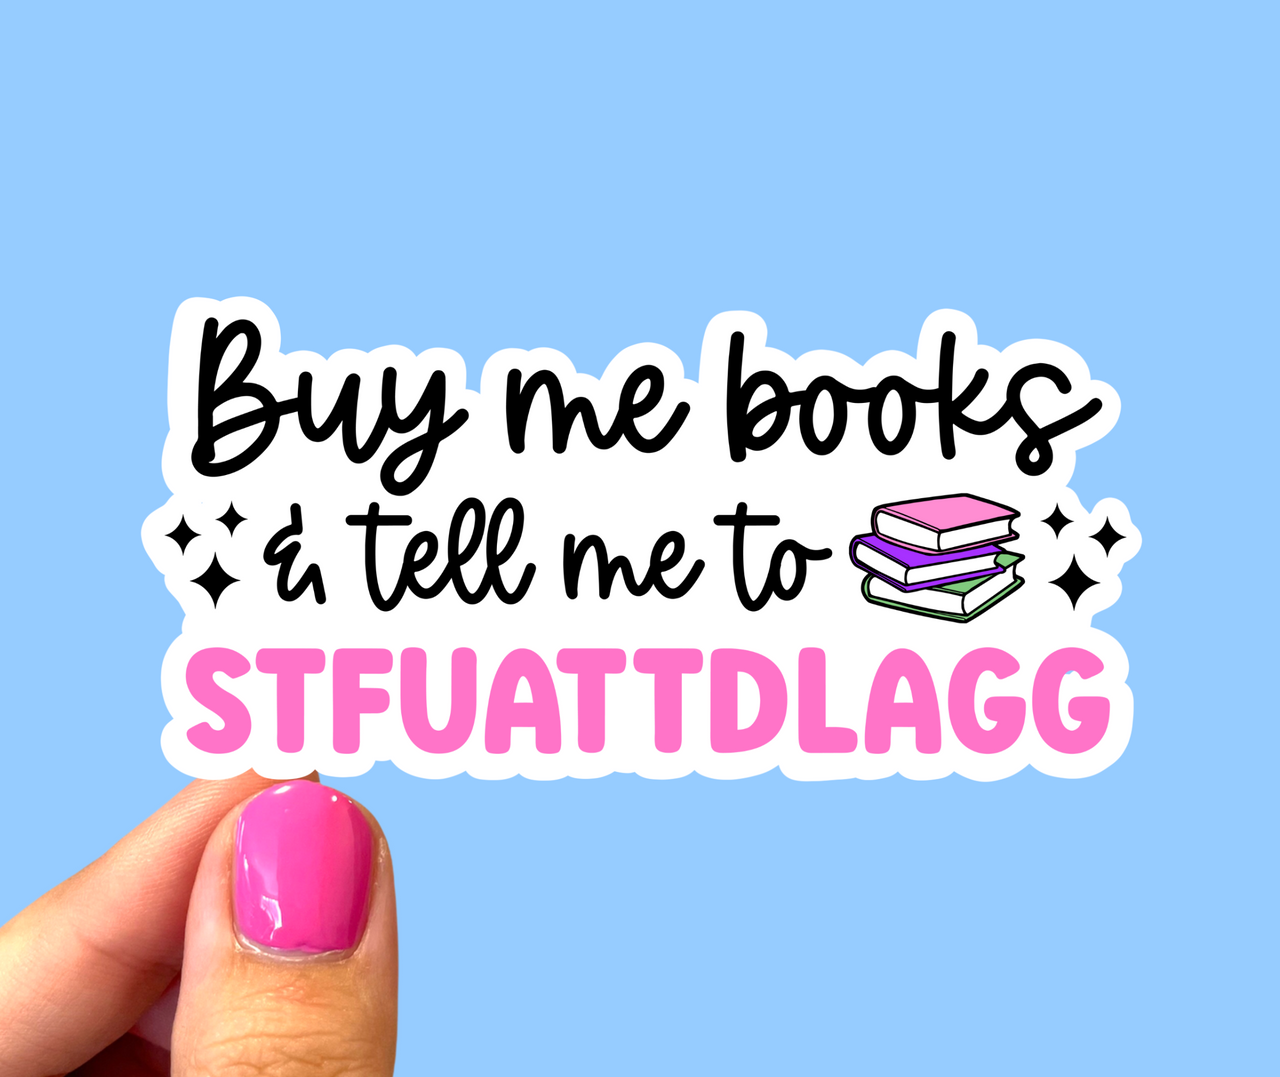 Buy me books and tell me to STFUATDDLAGG